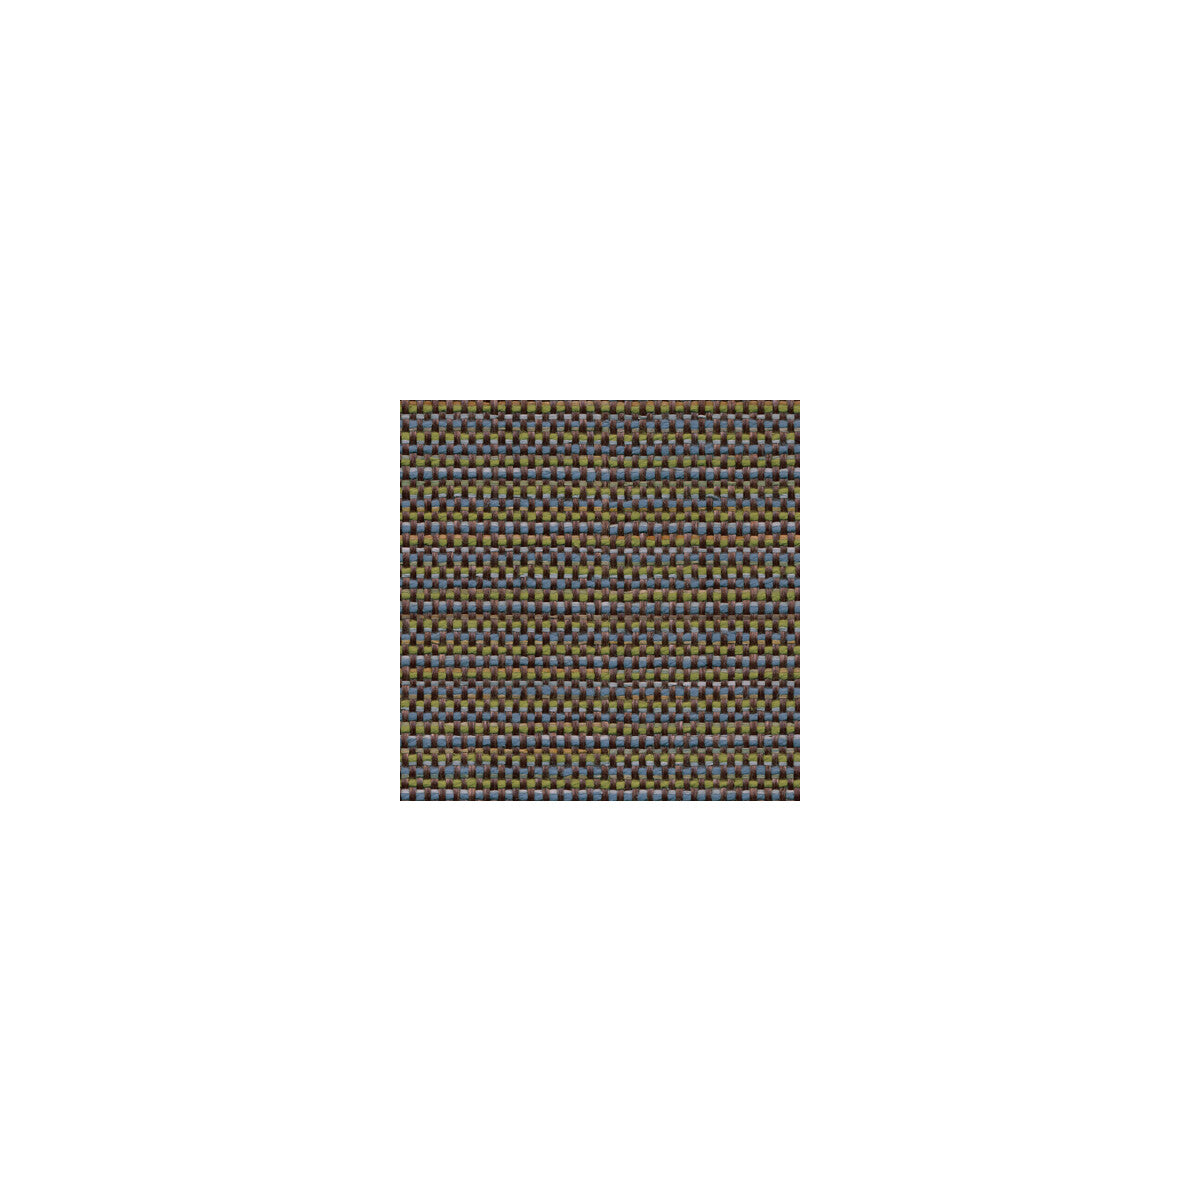 Kravet Contract fabric in 30163-650 color - pattern 30163.650.0 - by Kravet Contract